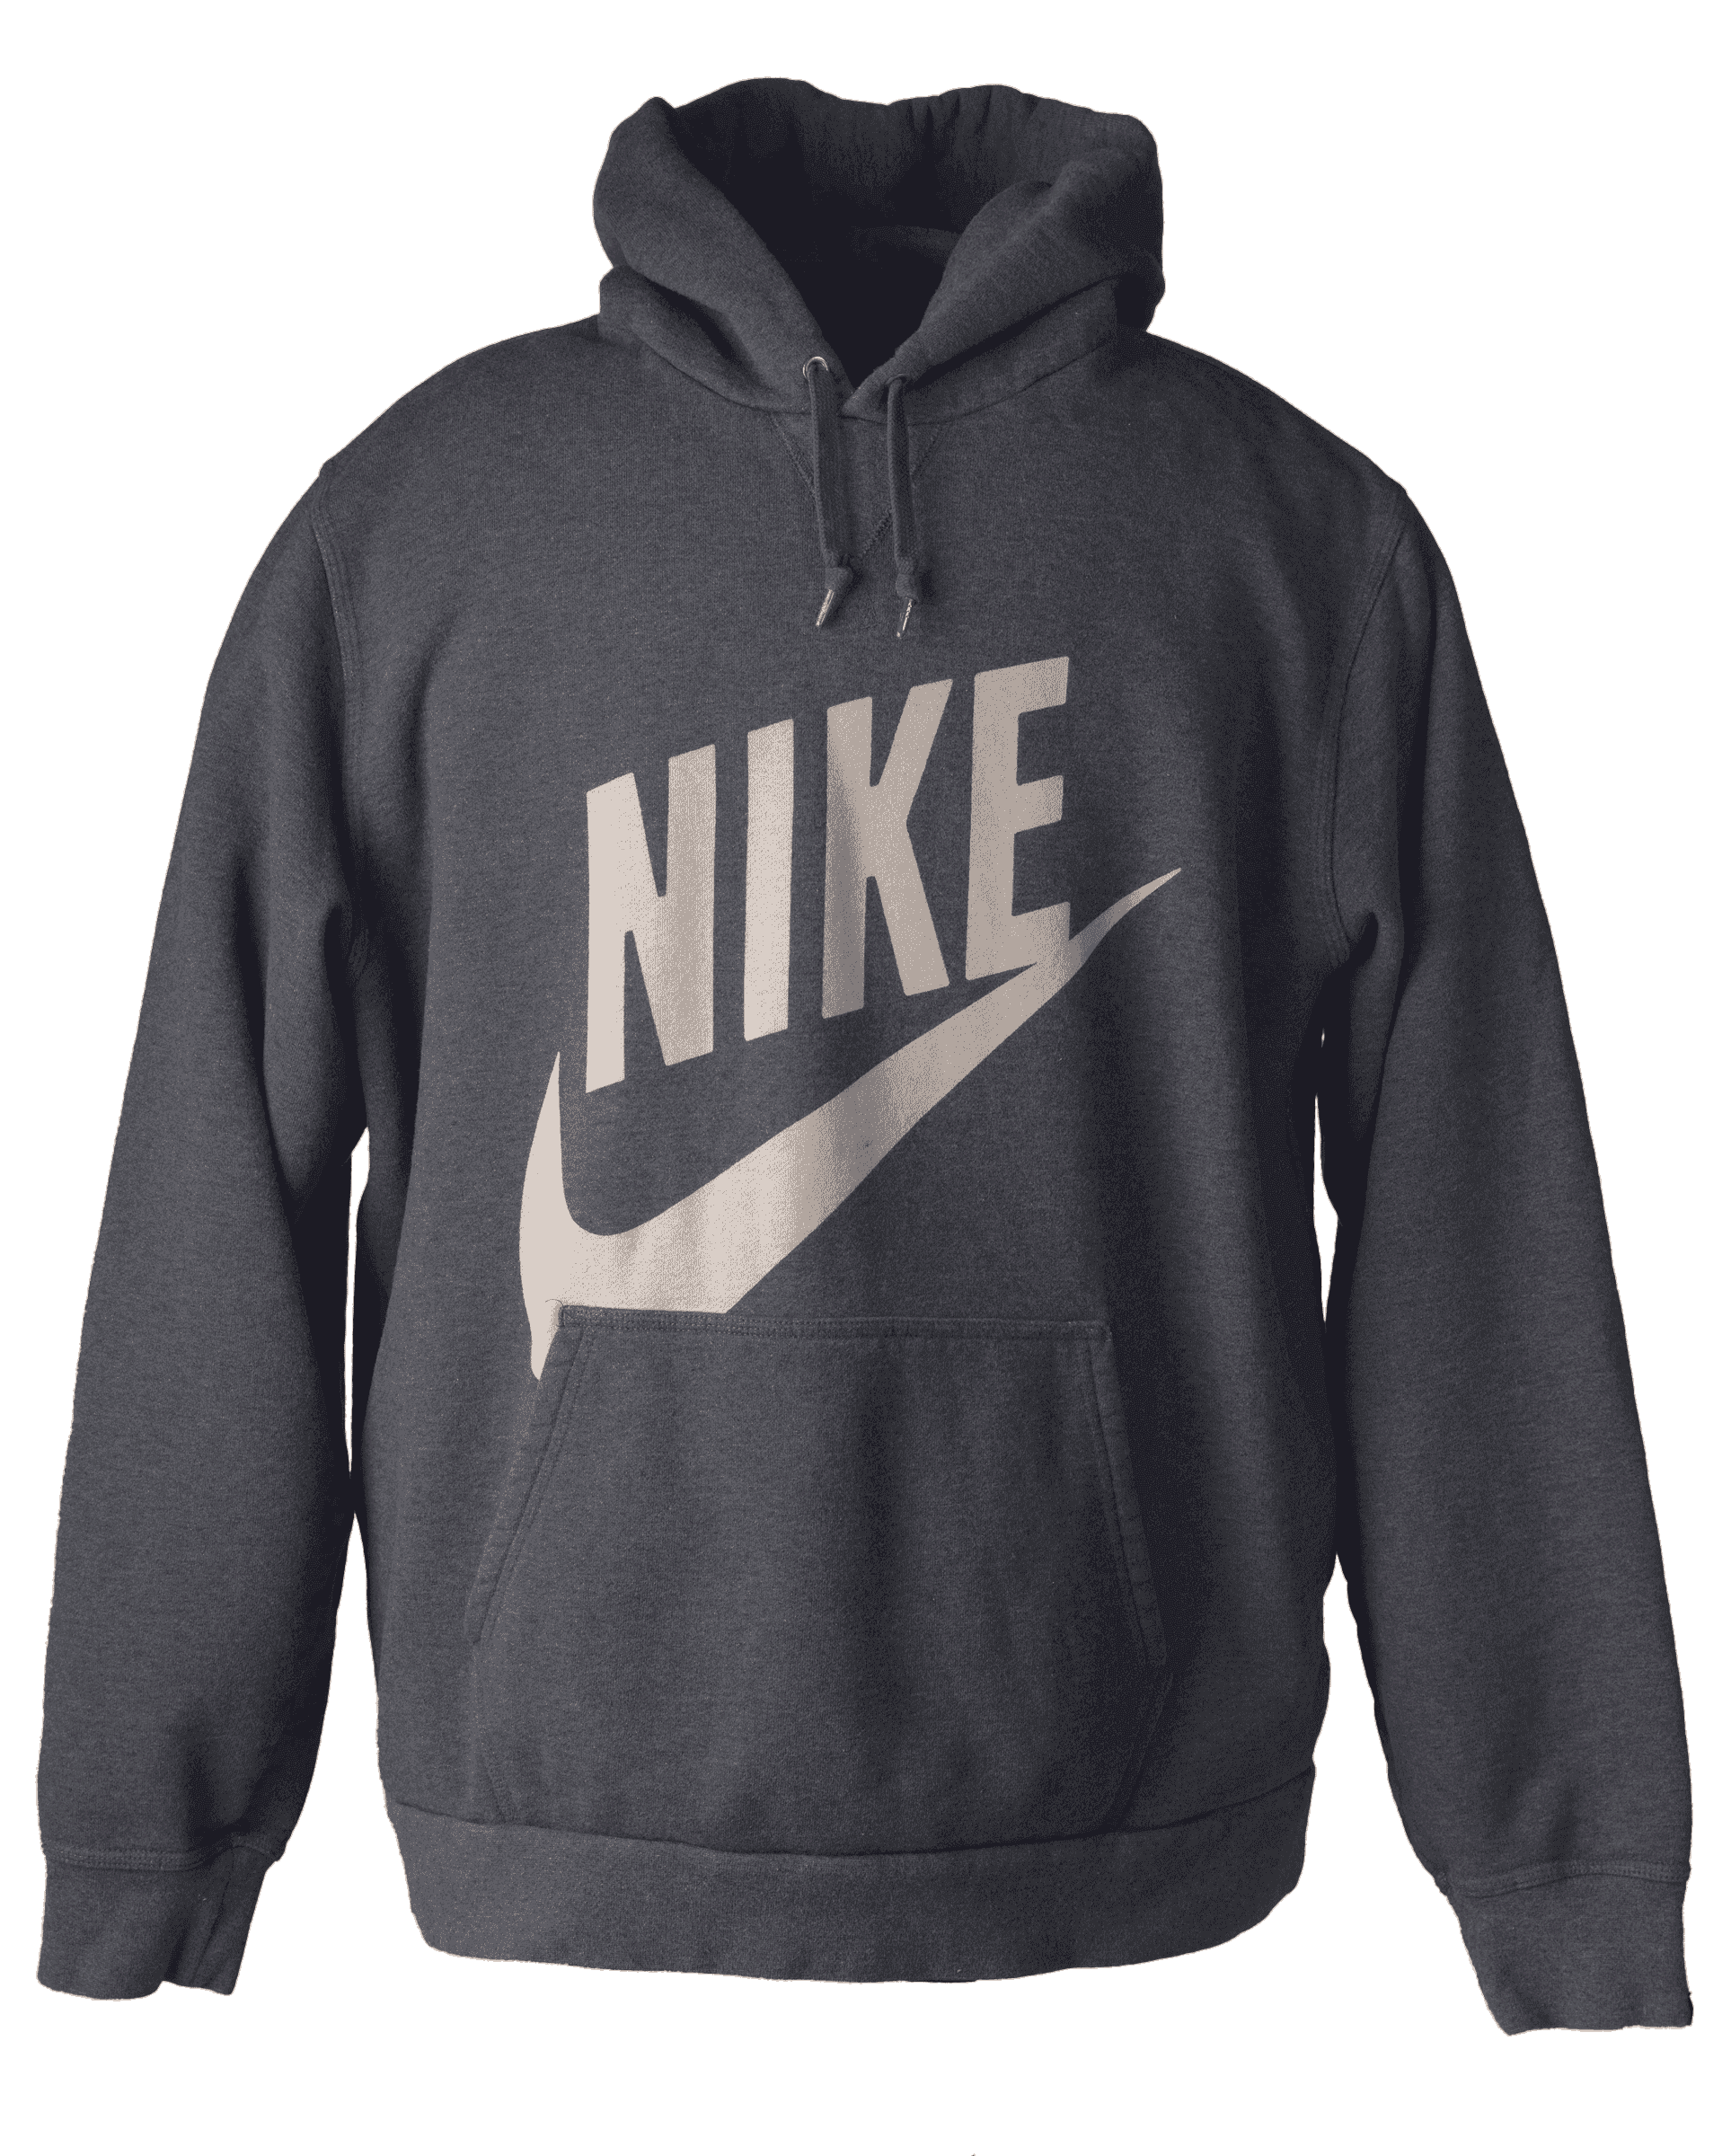 A dark gray Nike sweatshirt with the Nike brand and logo in large light grey font. The sweatshirt has a hood.